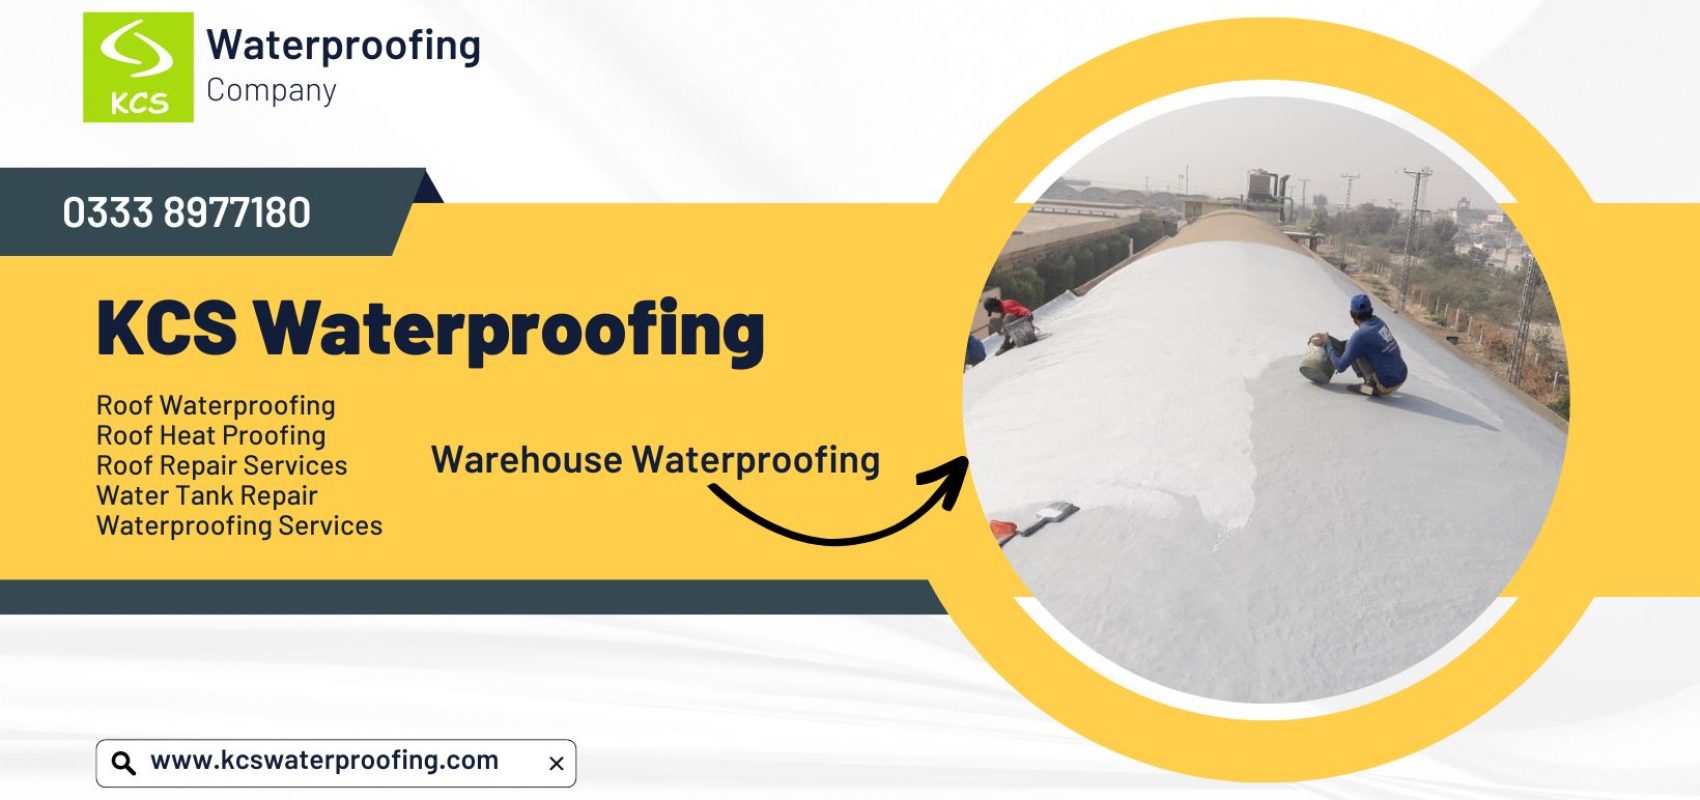 Warehouse Waterproofing Services